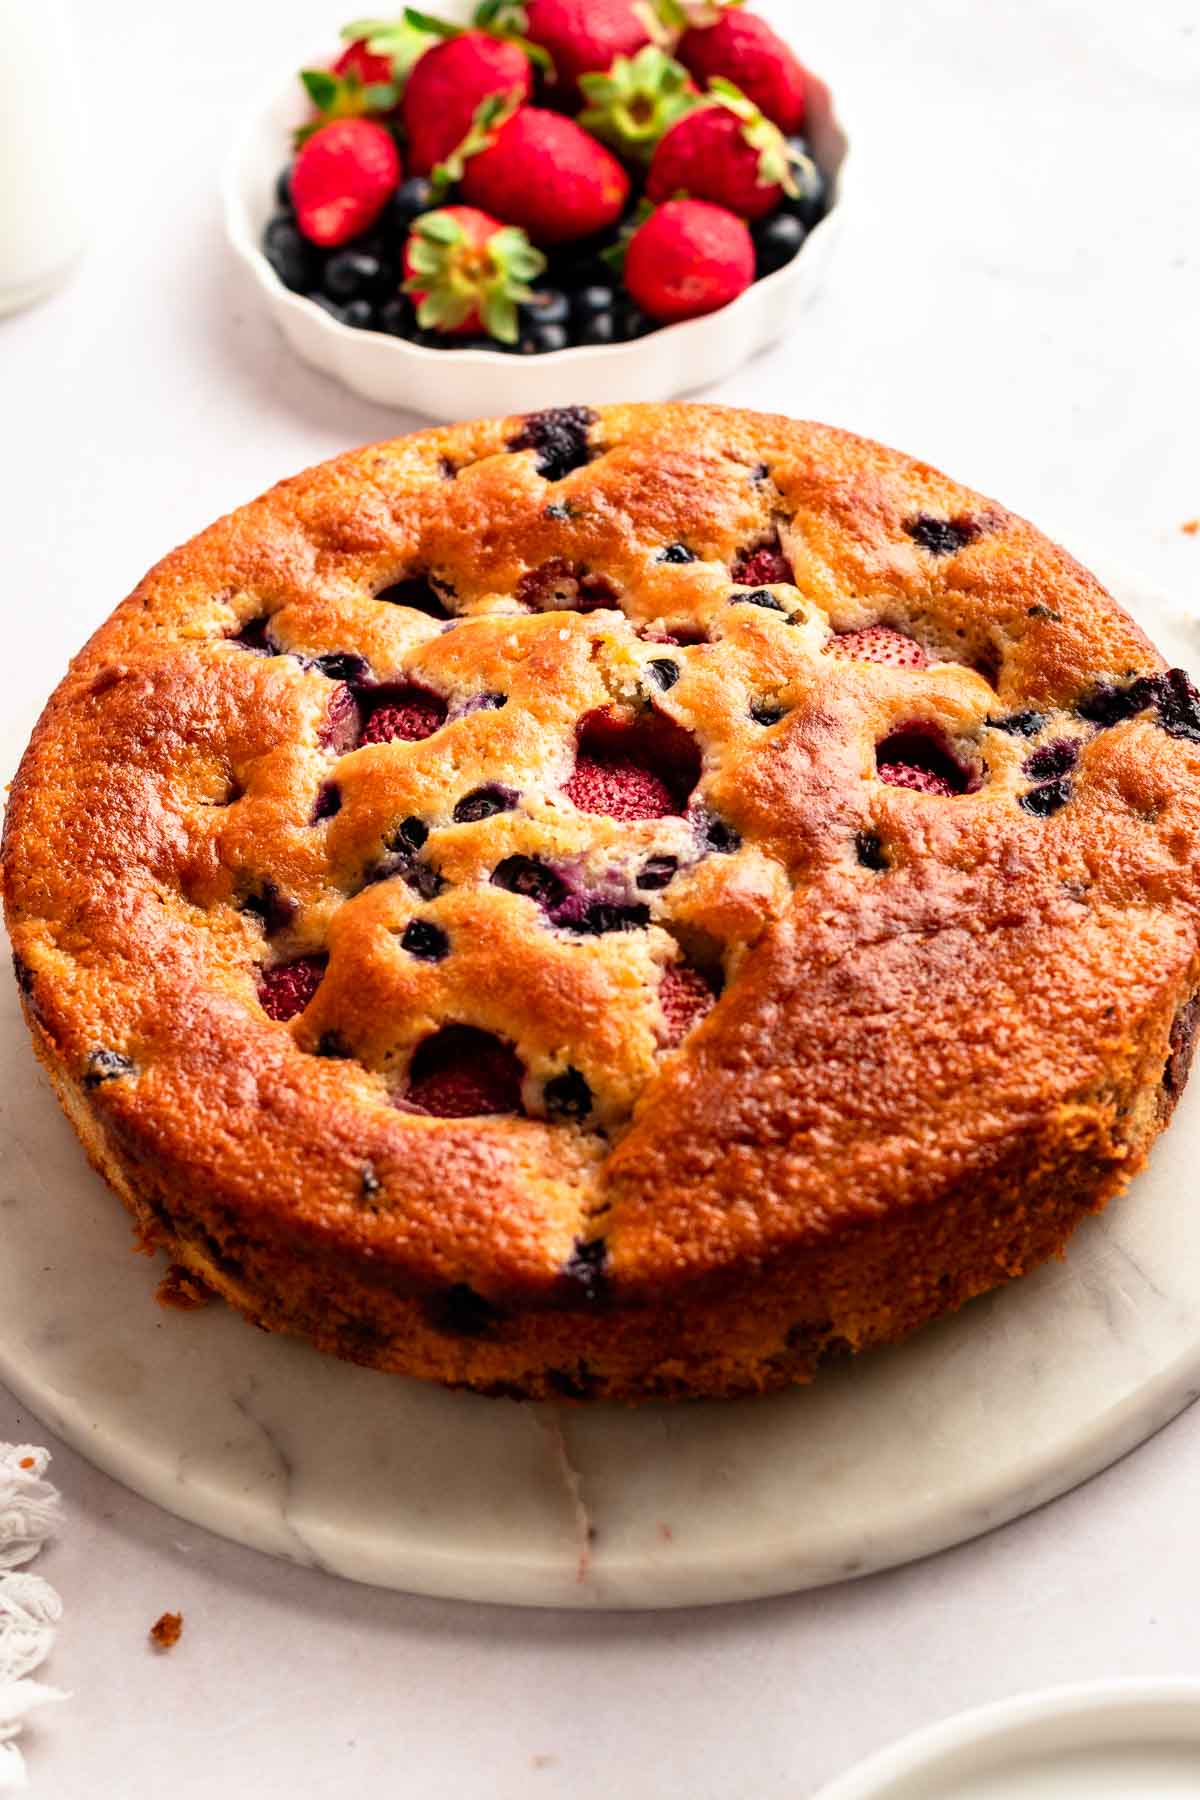 Berry cake on a cake plate next to fresh berries.